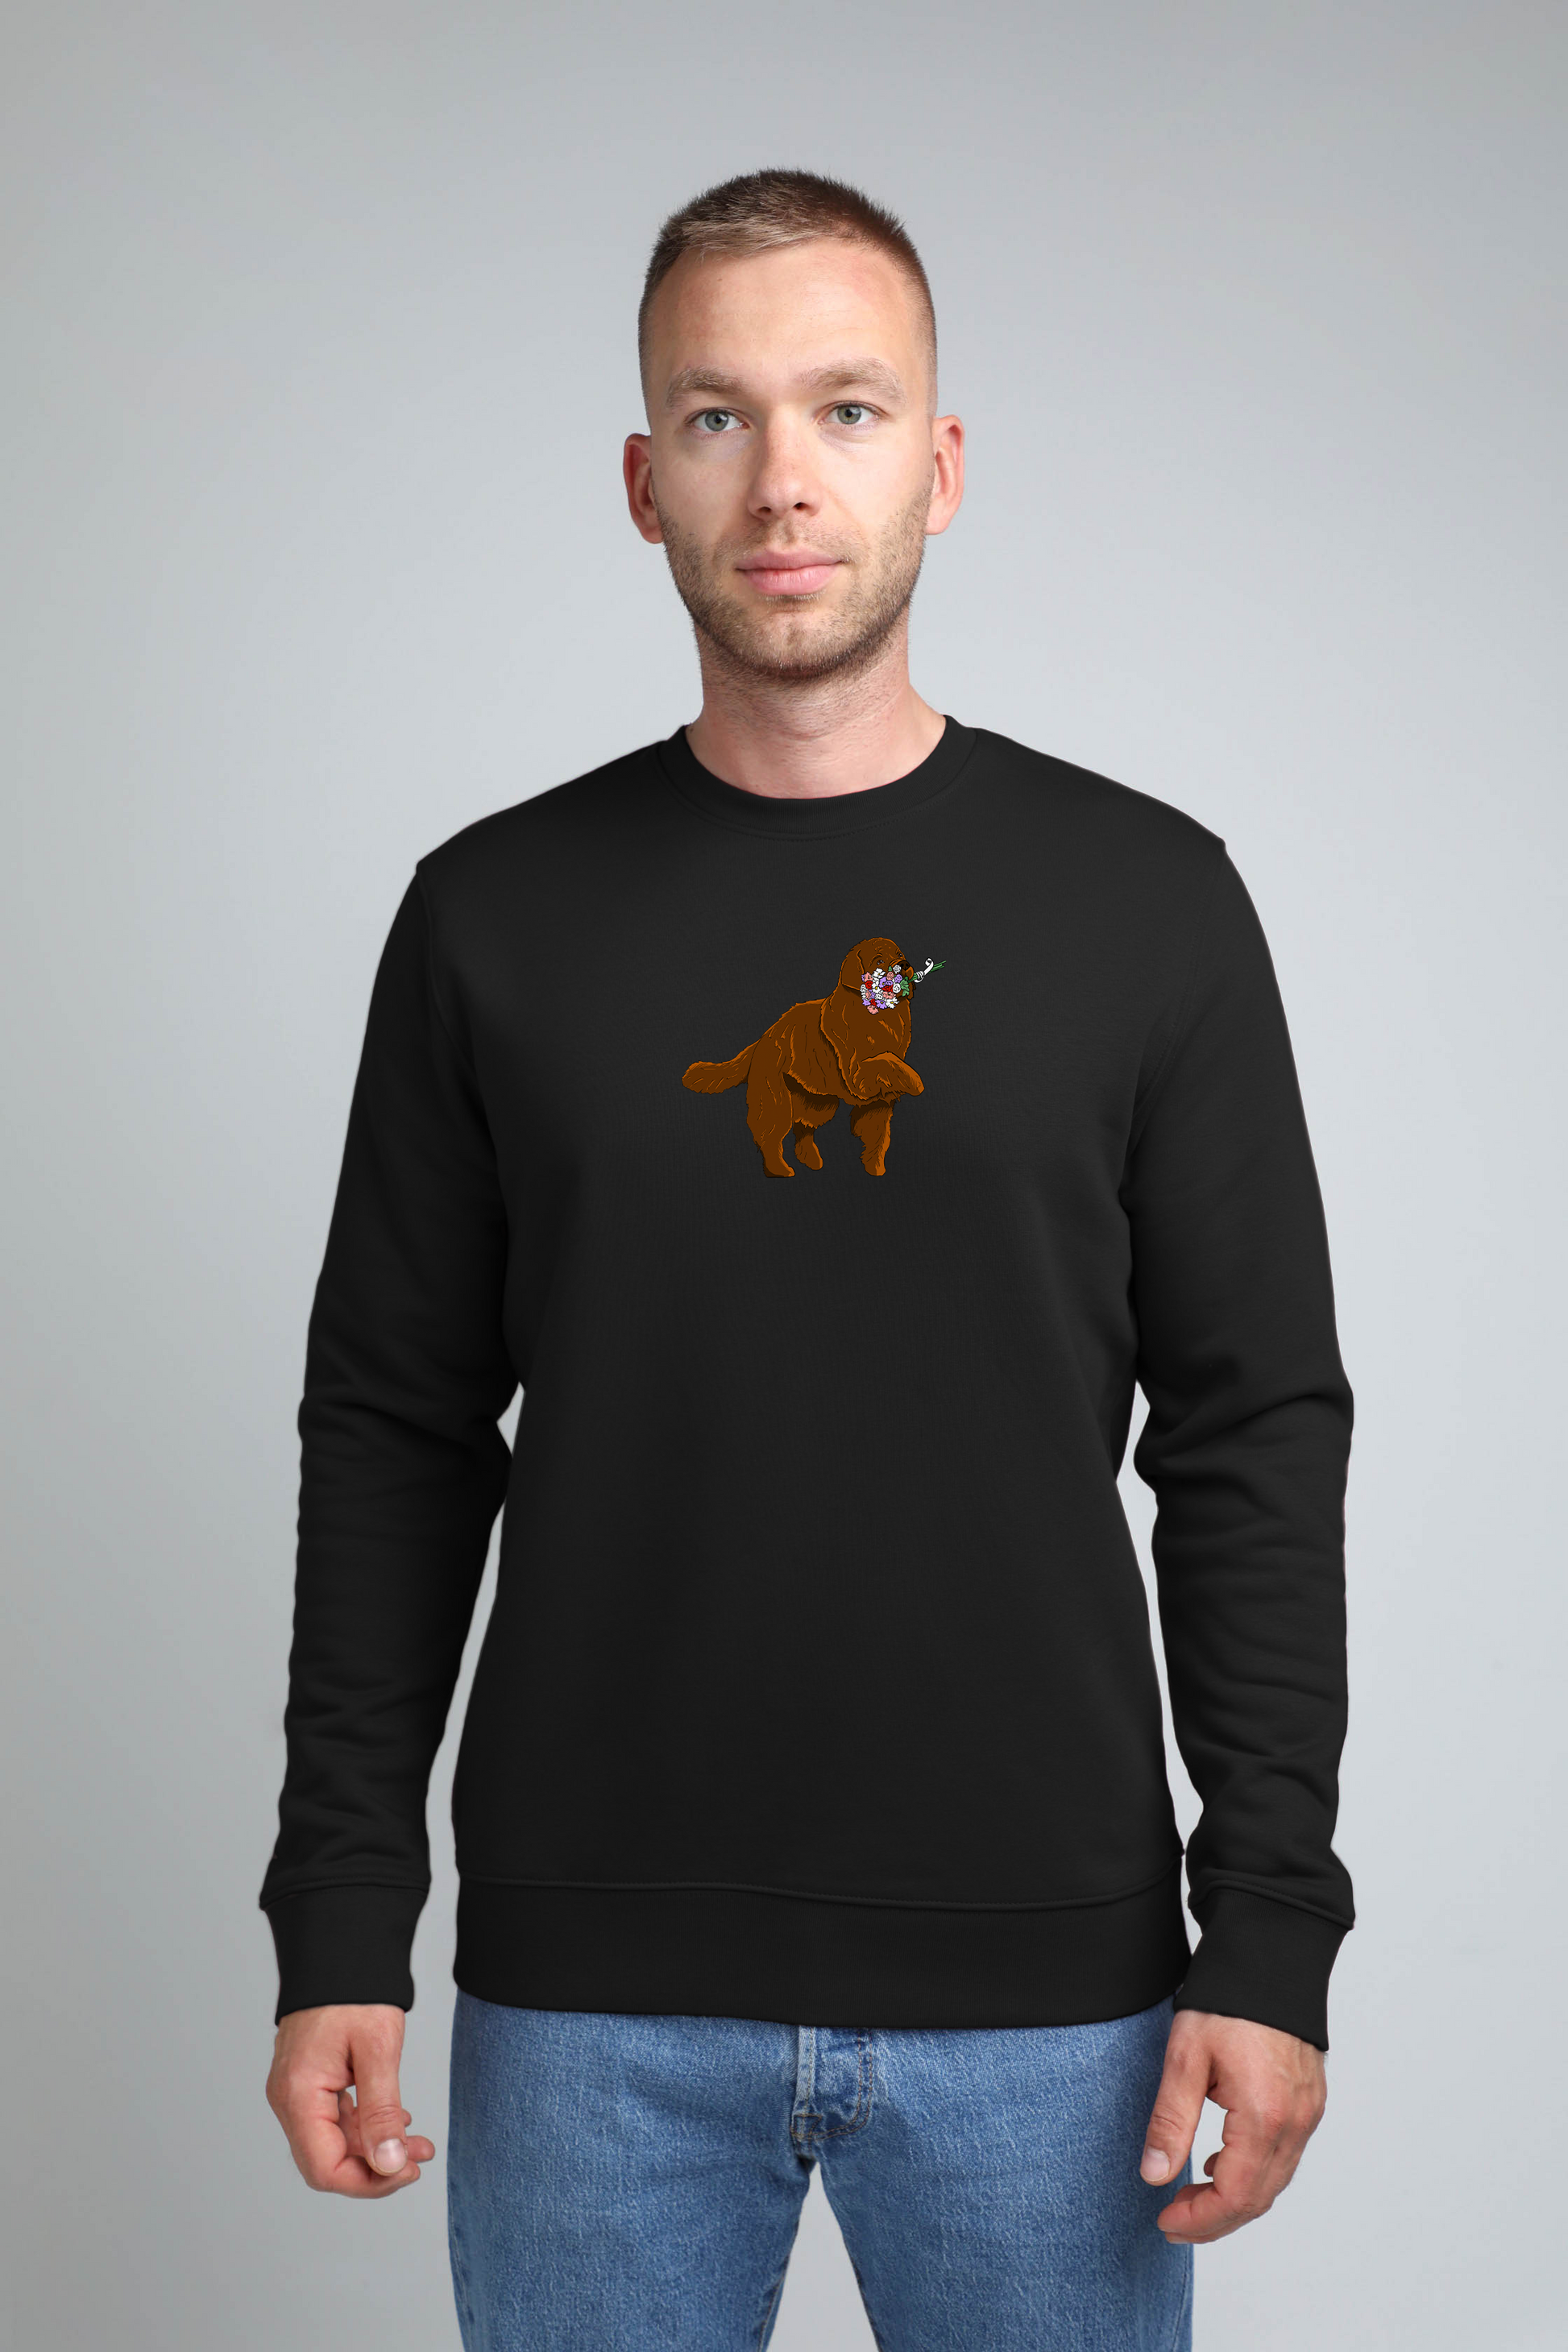 Giant dog with flowers | Crew neck sweatshirt with dog. Regular fit | Unisex by My Wild Other